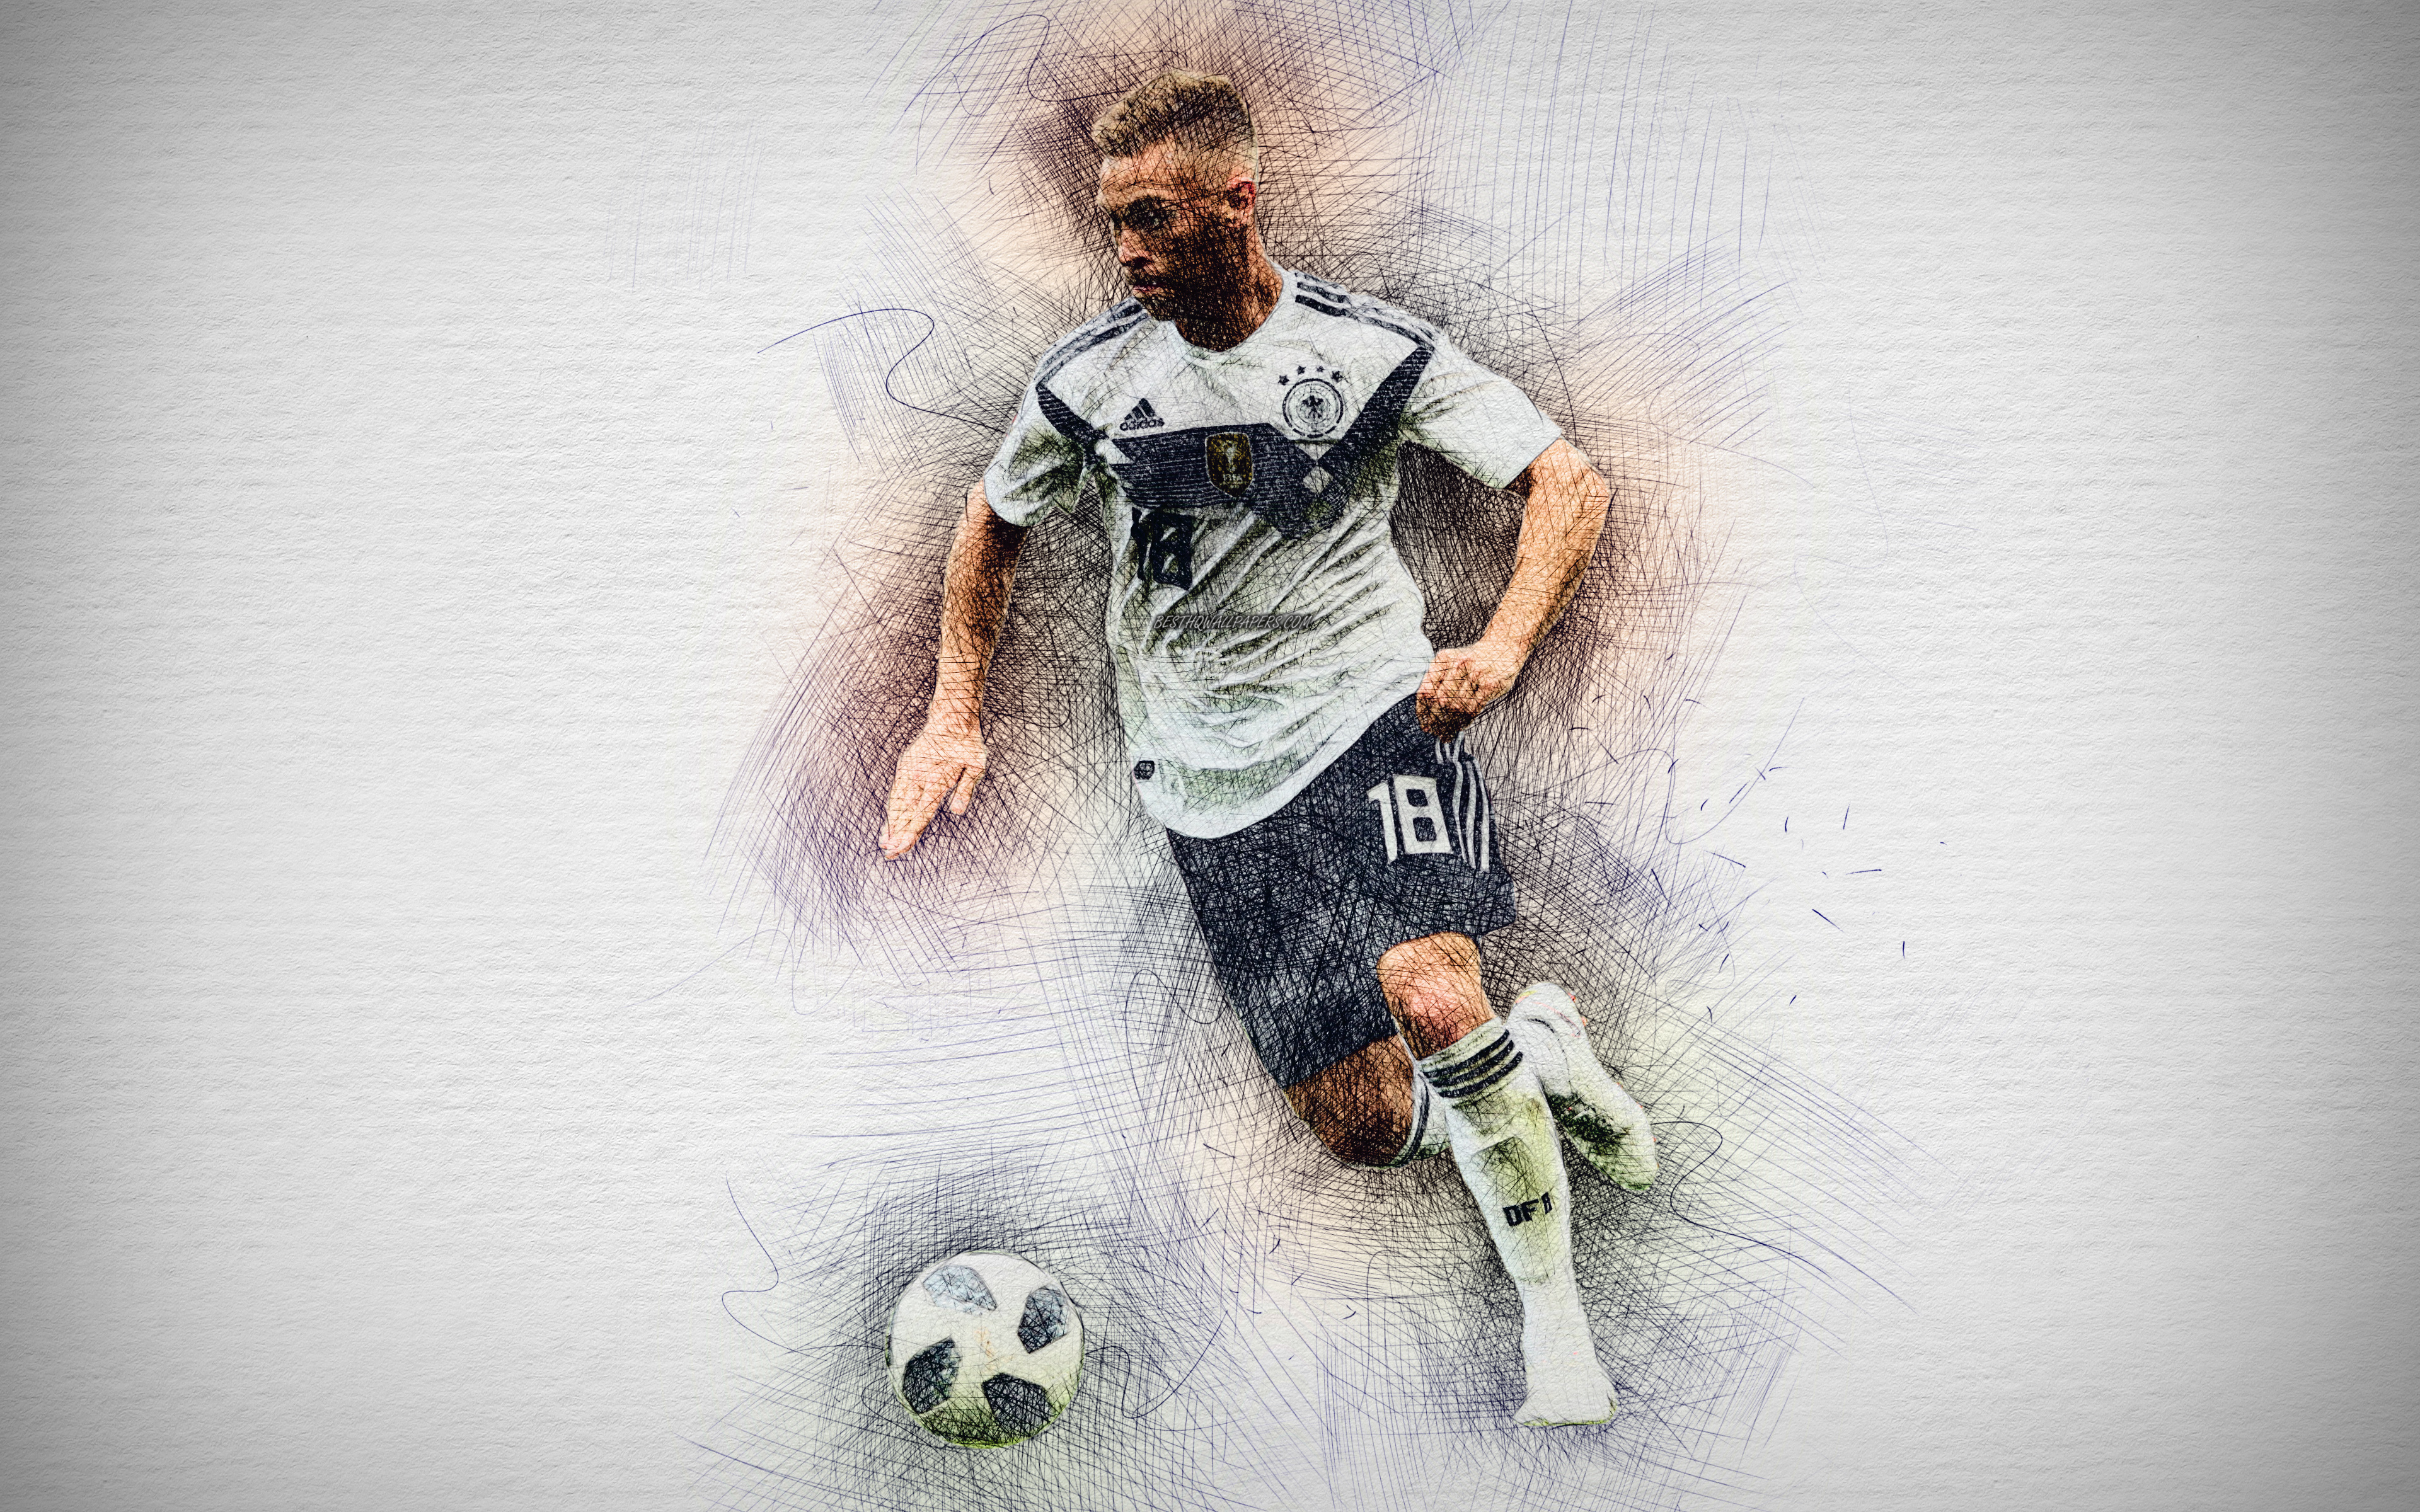 Kimmich Wallpapers